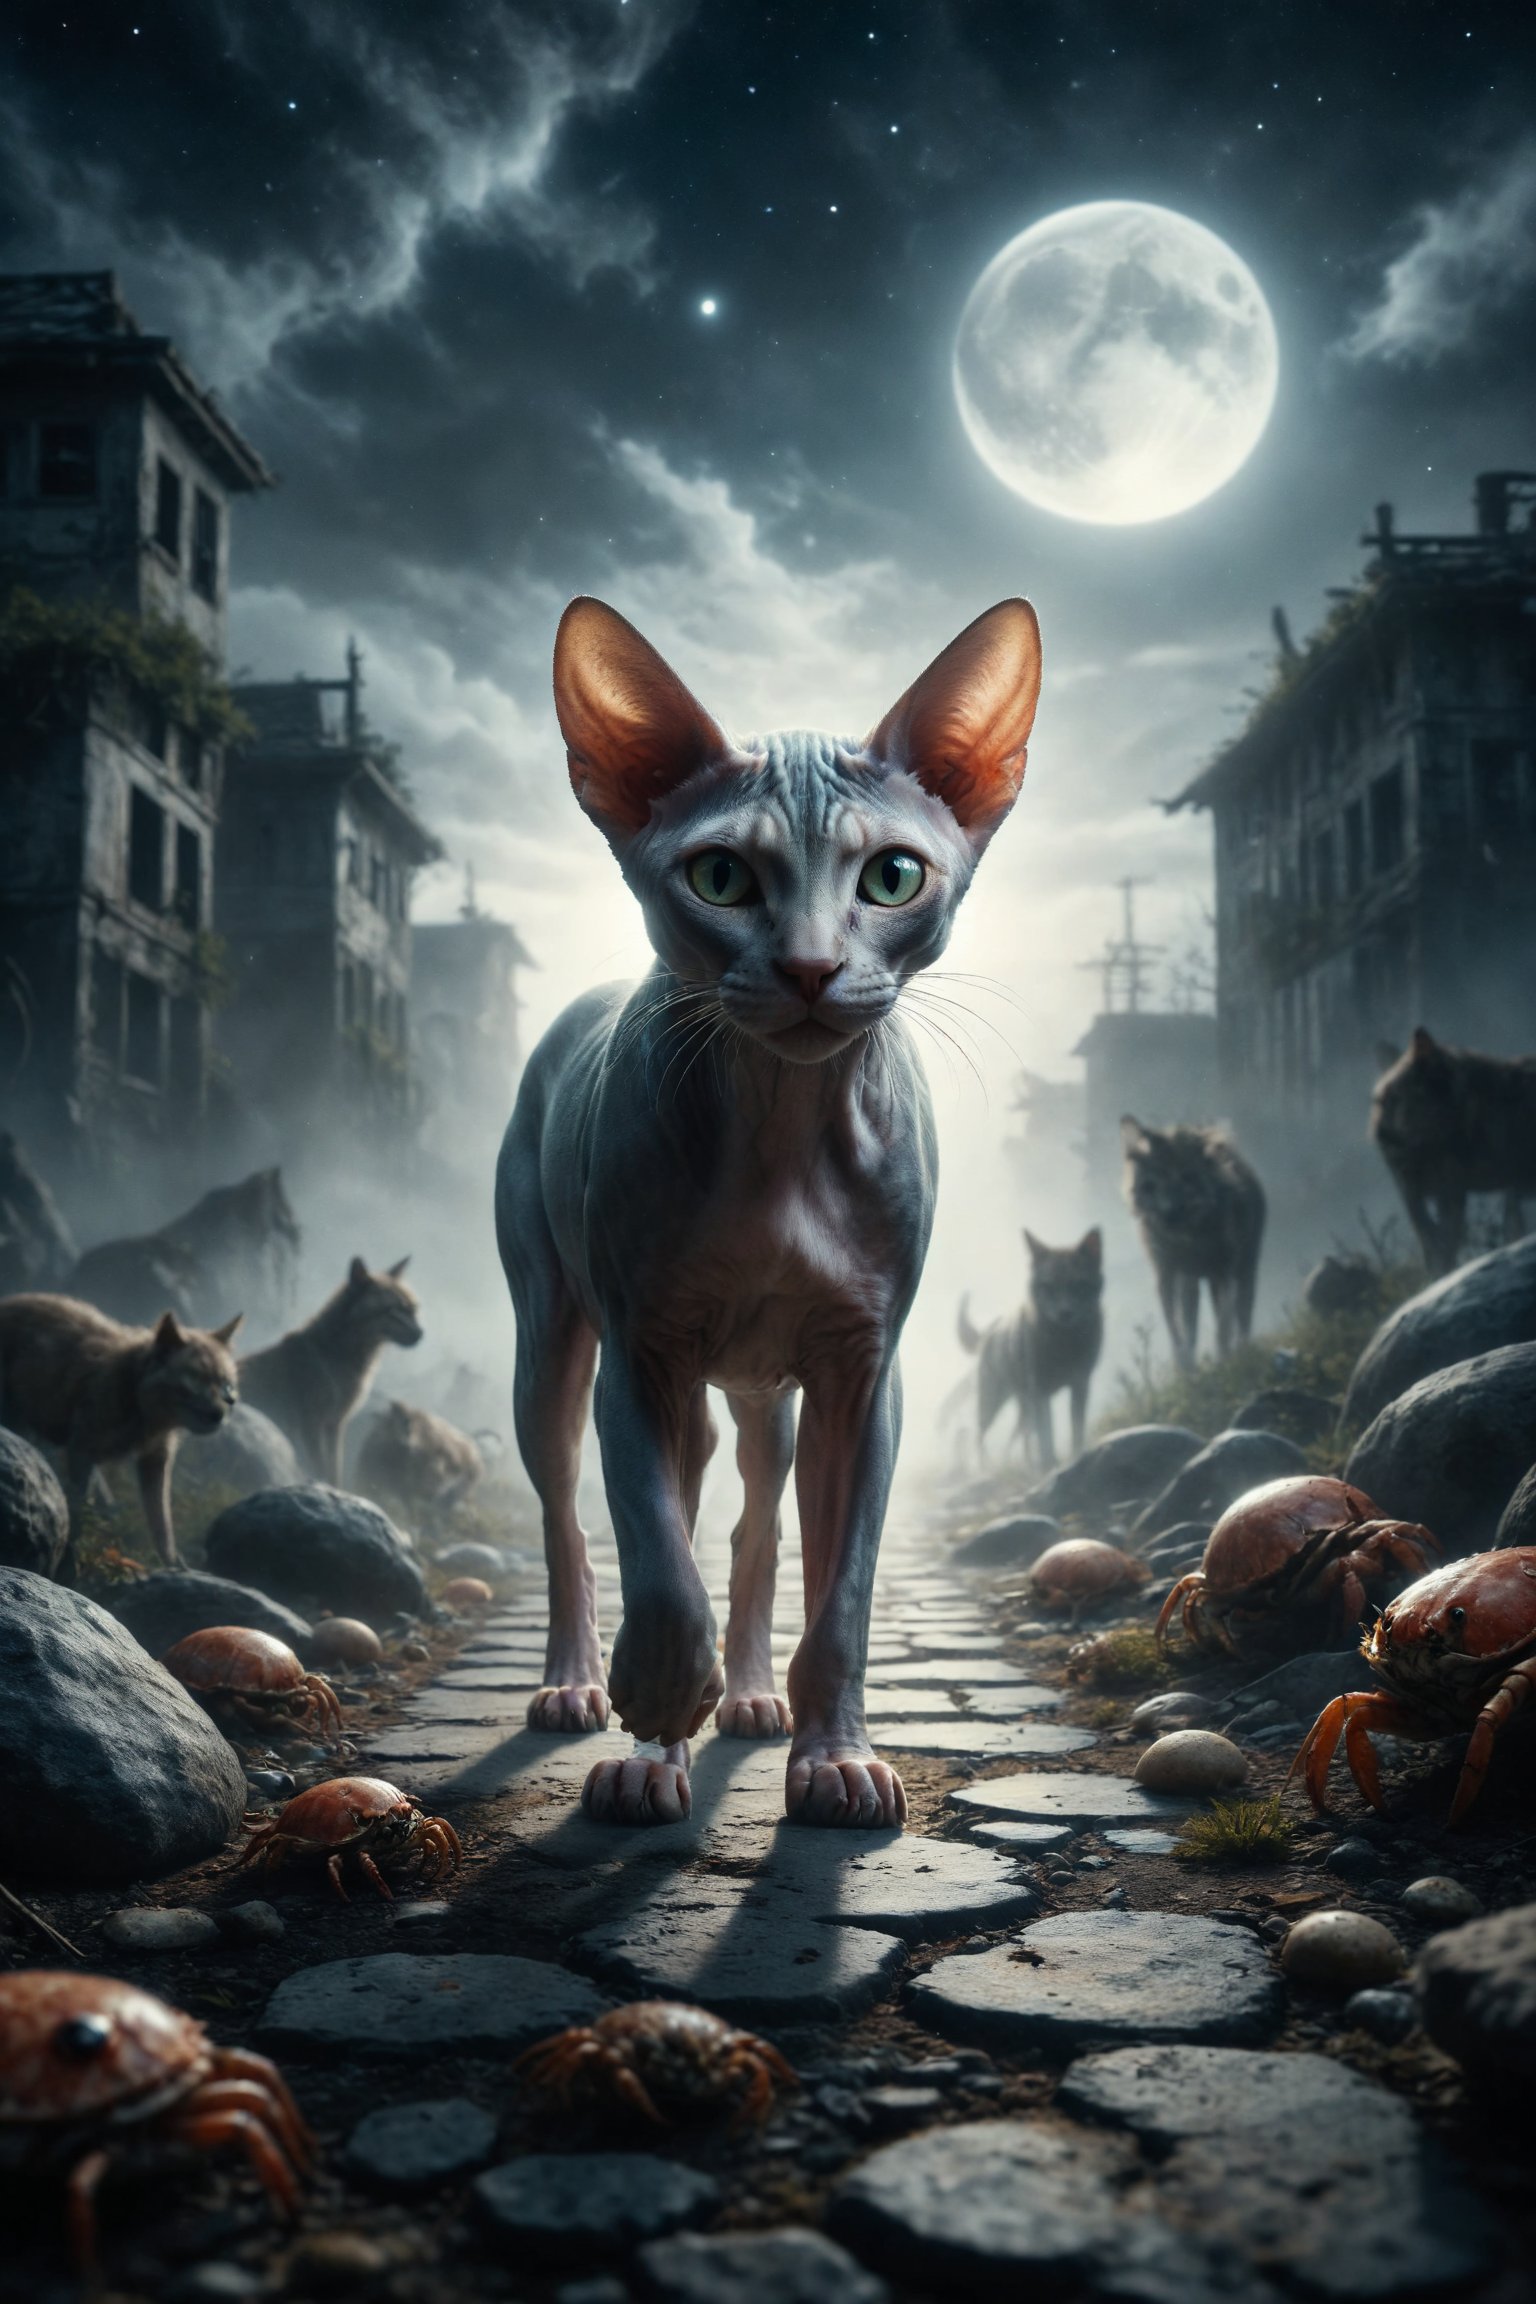 Generate an image of a Sphynx cat walking on a path under a full moon, surrounded by wolves and a crab, symbolizing intuition, mystery, and the hidden.